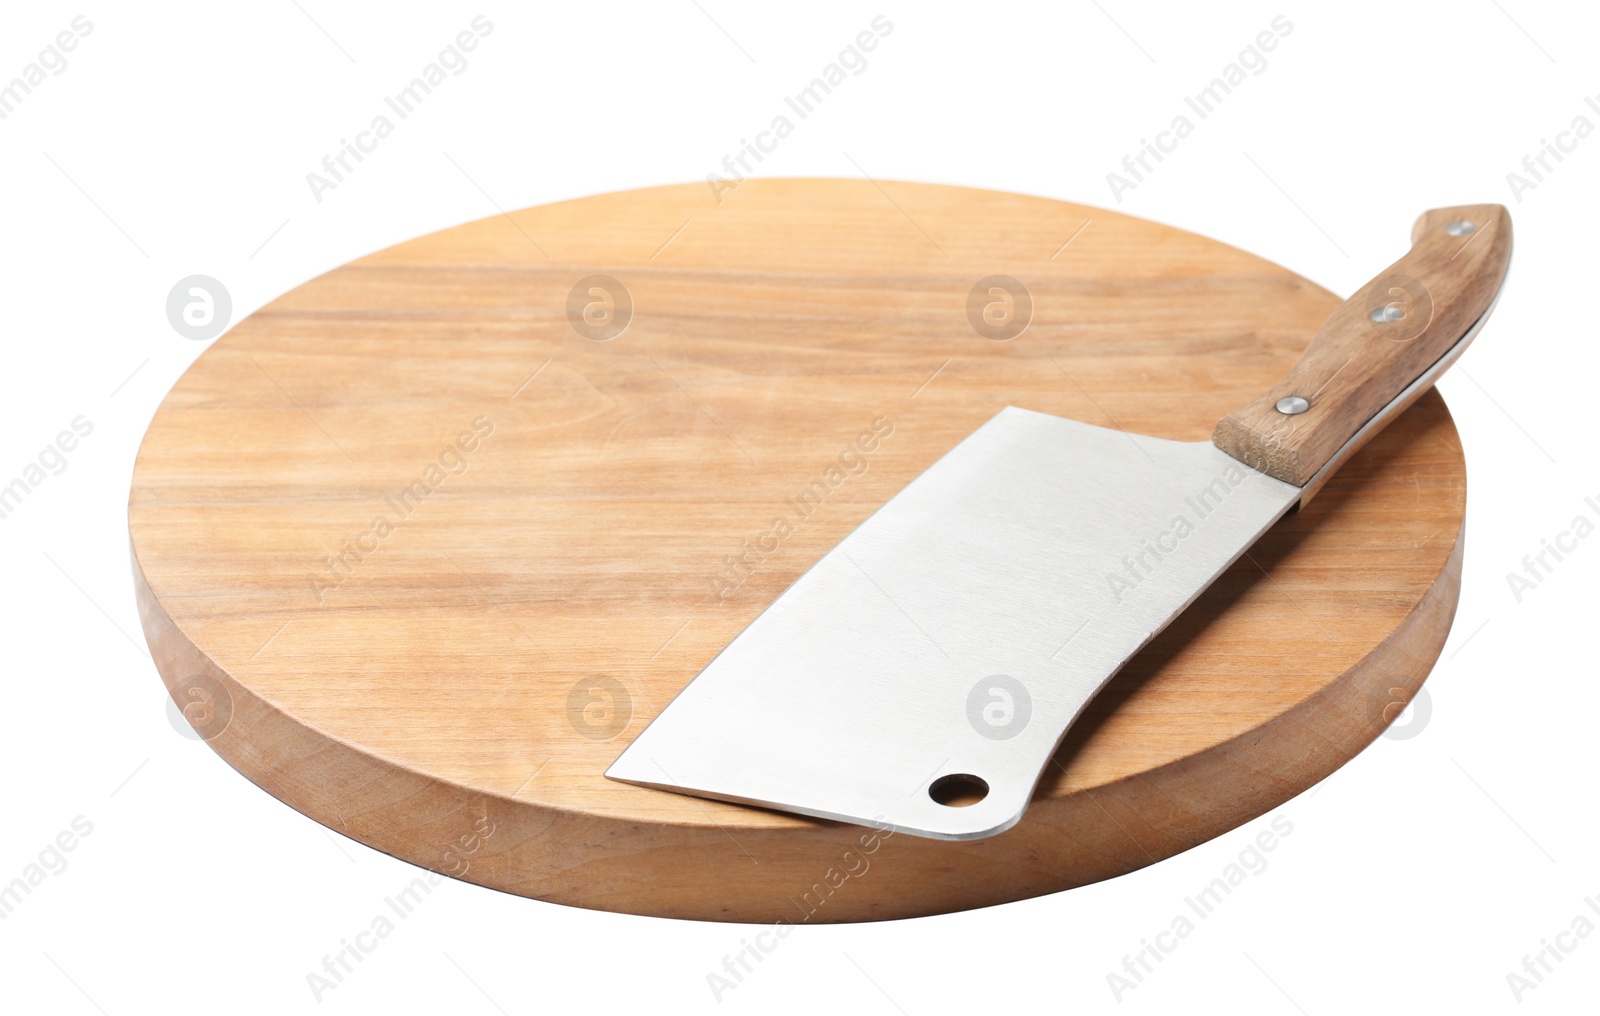 Photo of Cleaver knife and wooden board isolated on white